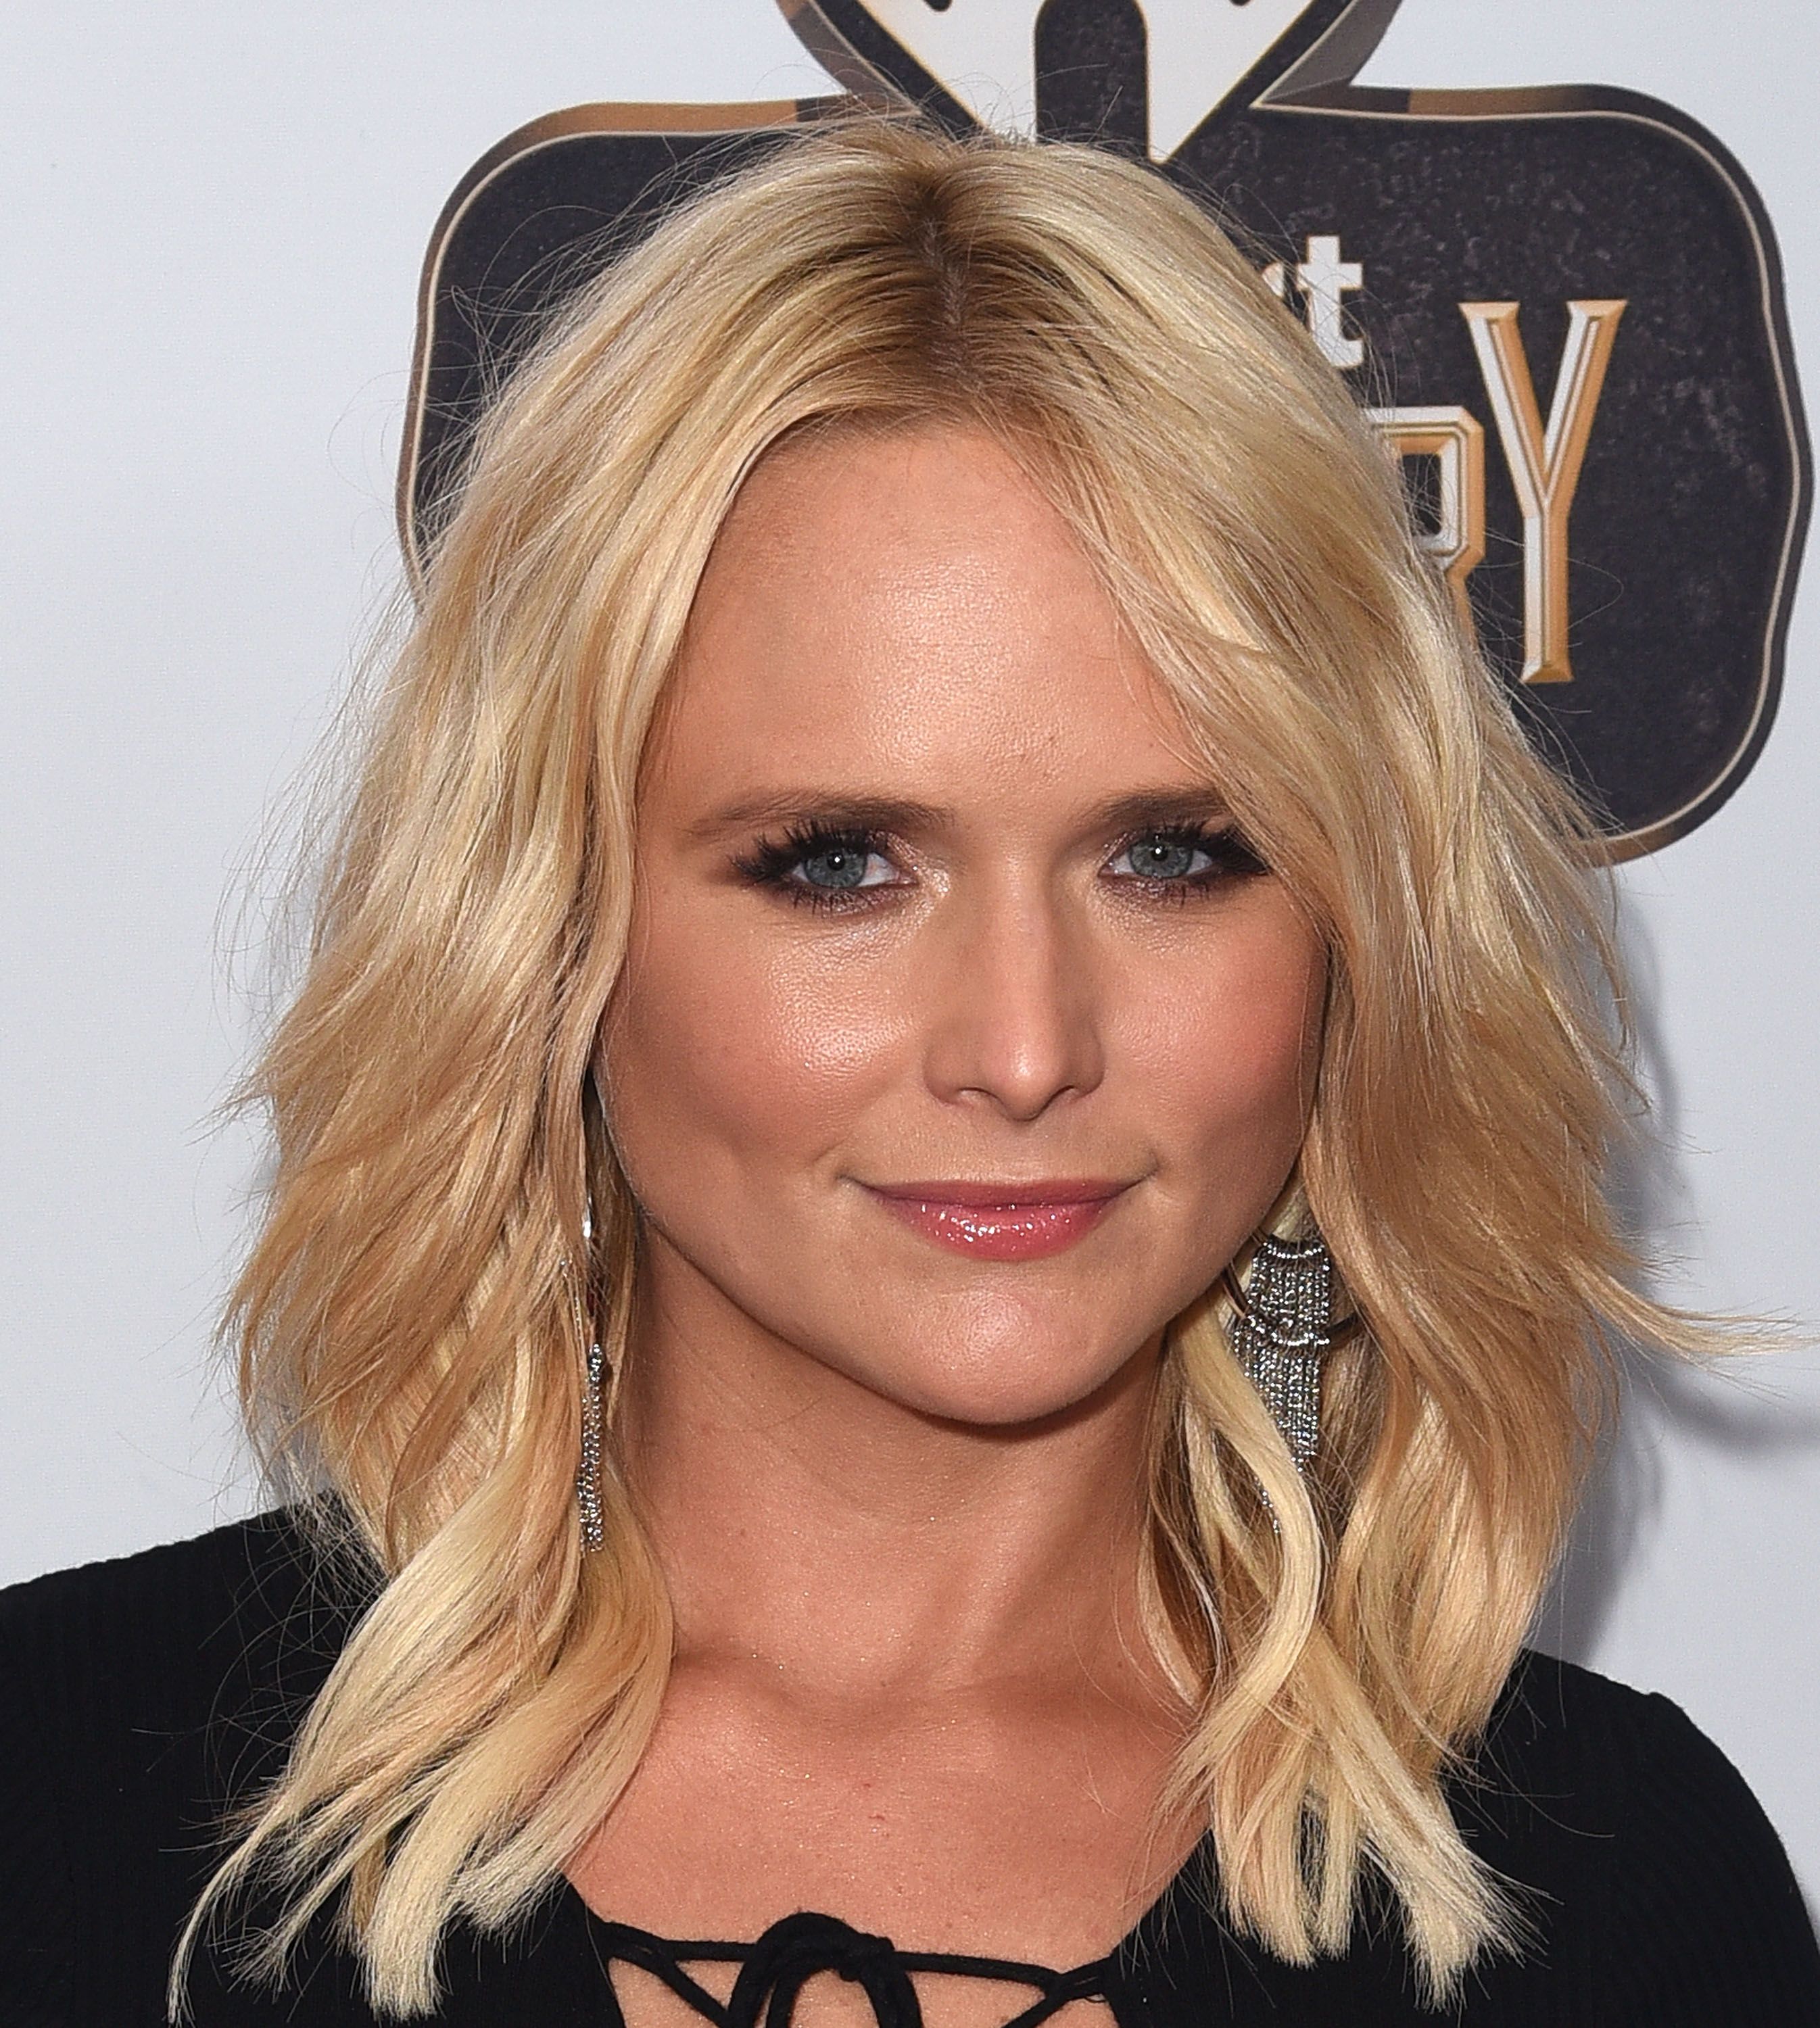 Miranda Lambert arrives at the iHeartCountry Festival at The Frank Erwin Center on April 30, 2016, in Austin, Texas | Photo: C. Flanigan/Getty Images